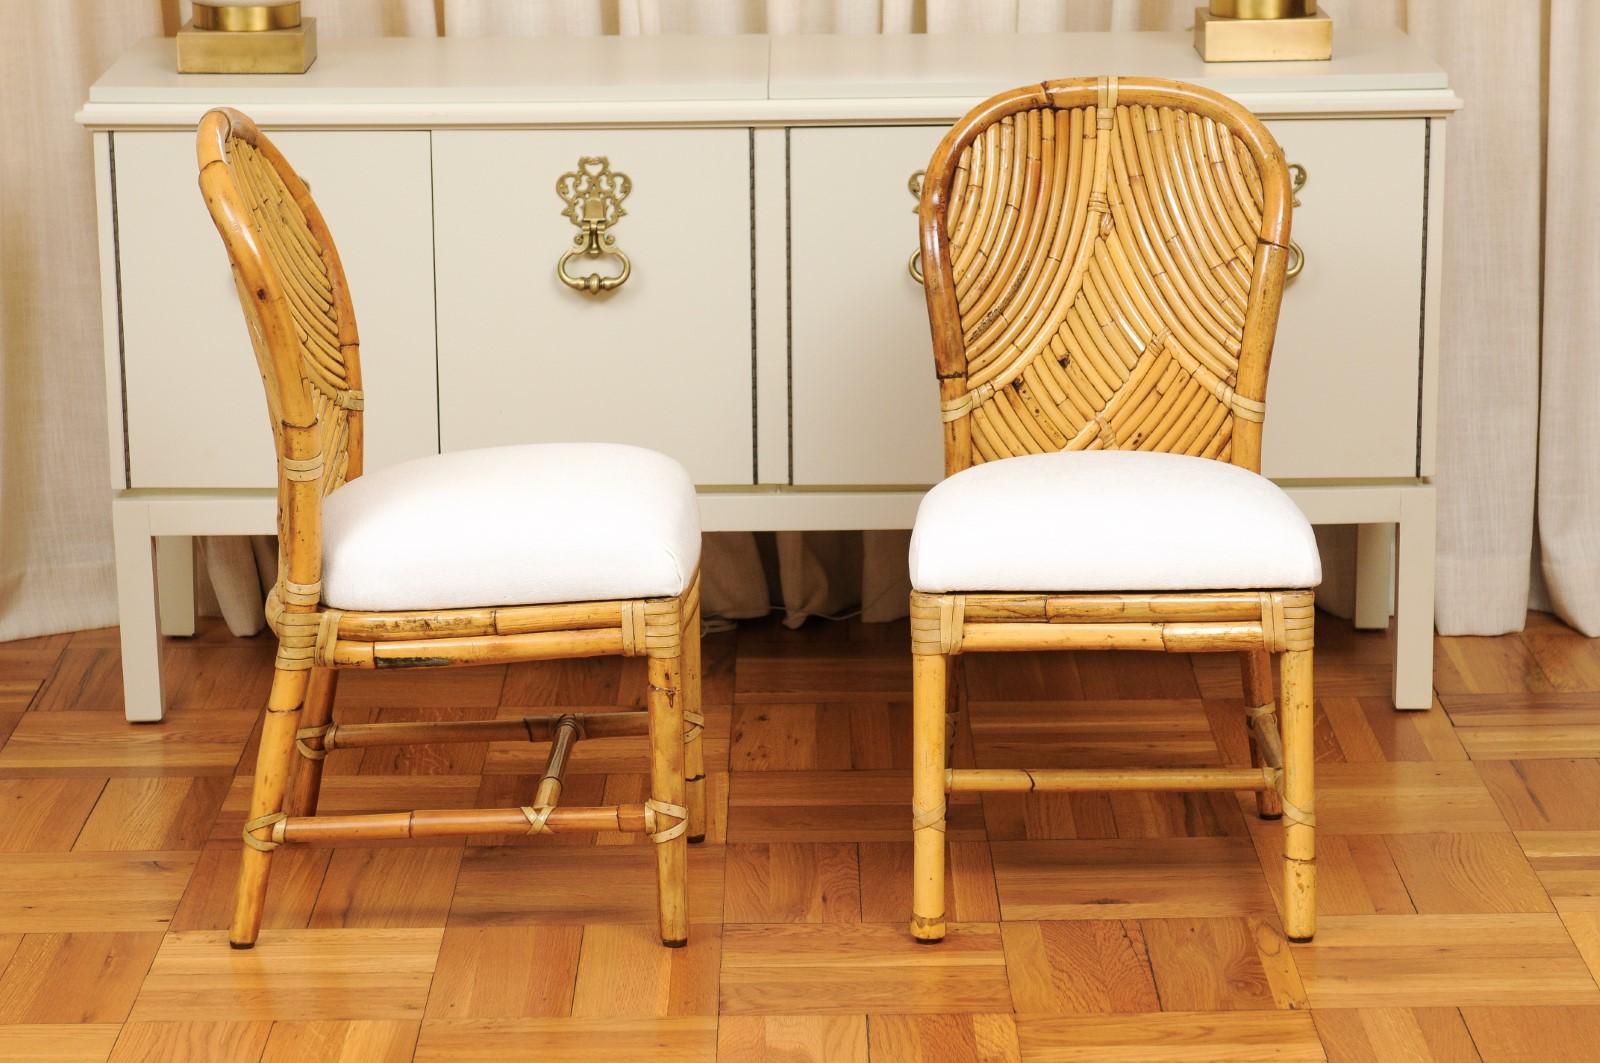 Stellar Restored Set of 10 Rattan Parquetry Bistro Chairs by McGuire, circa 1975 In Good Condition For Sale In Atlanta, GA